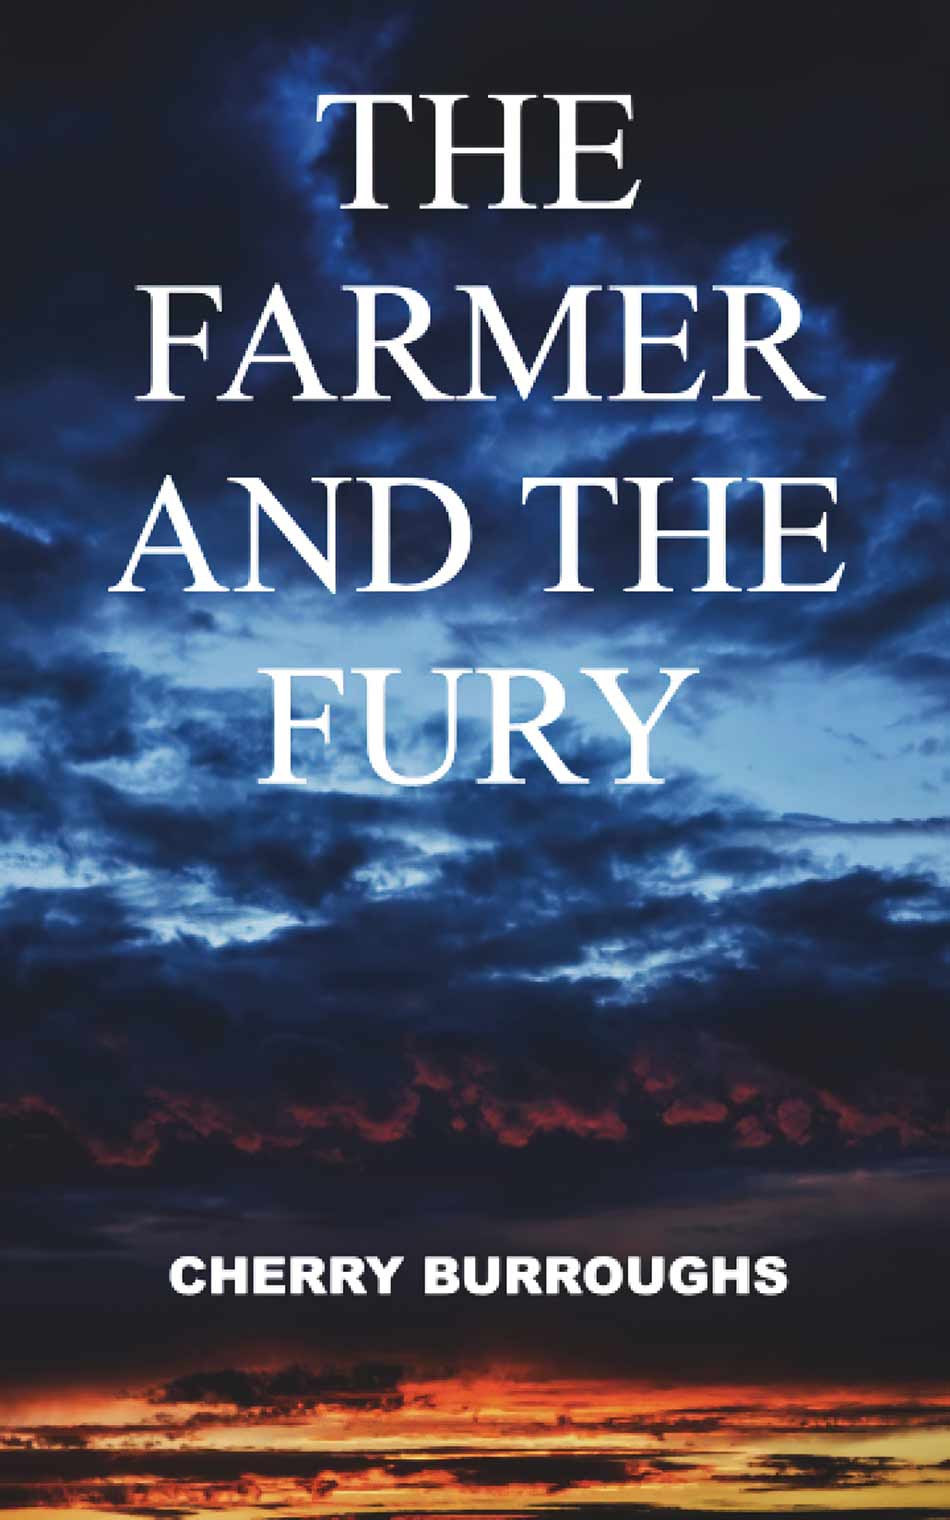 Cherry Burroughs - The Farmer and the Fury